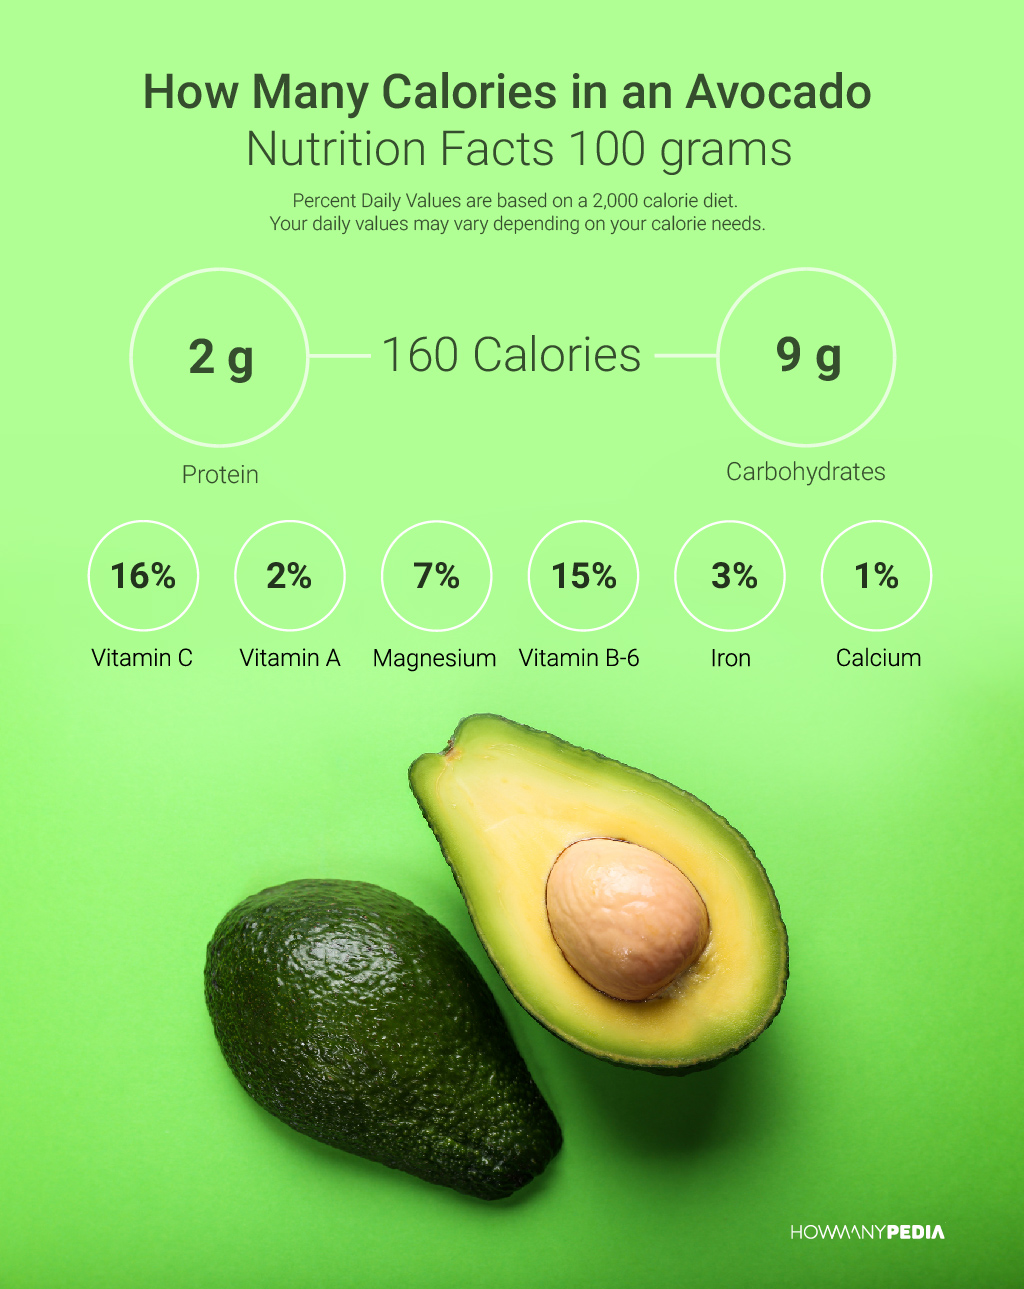 How Many Calories in an Avocado Nutrition Facts